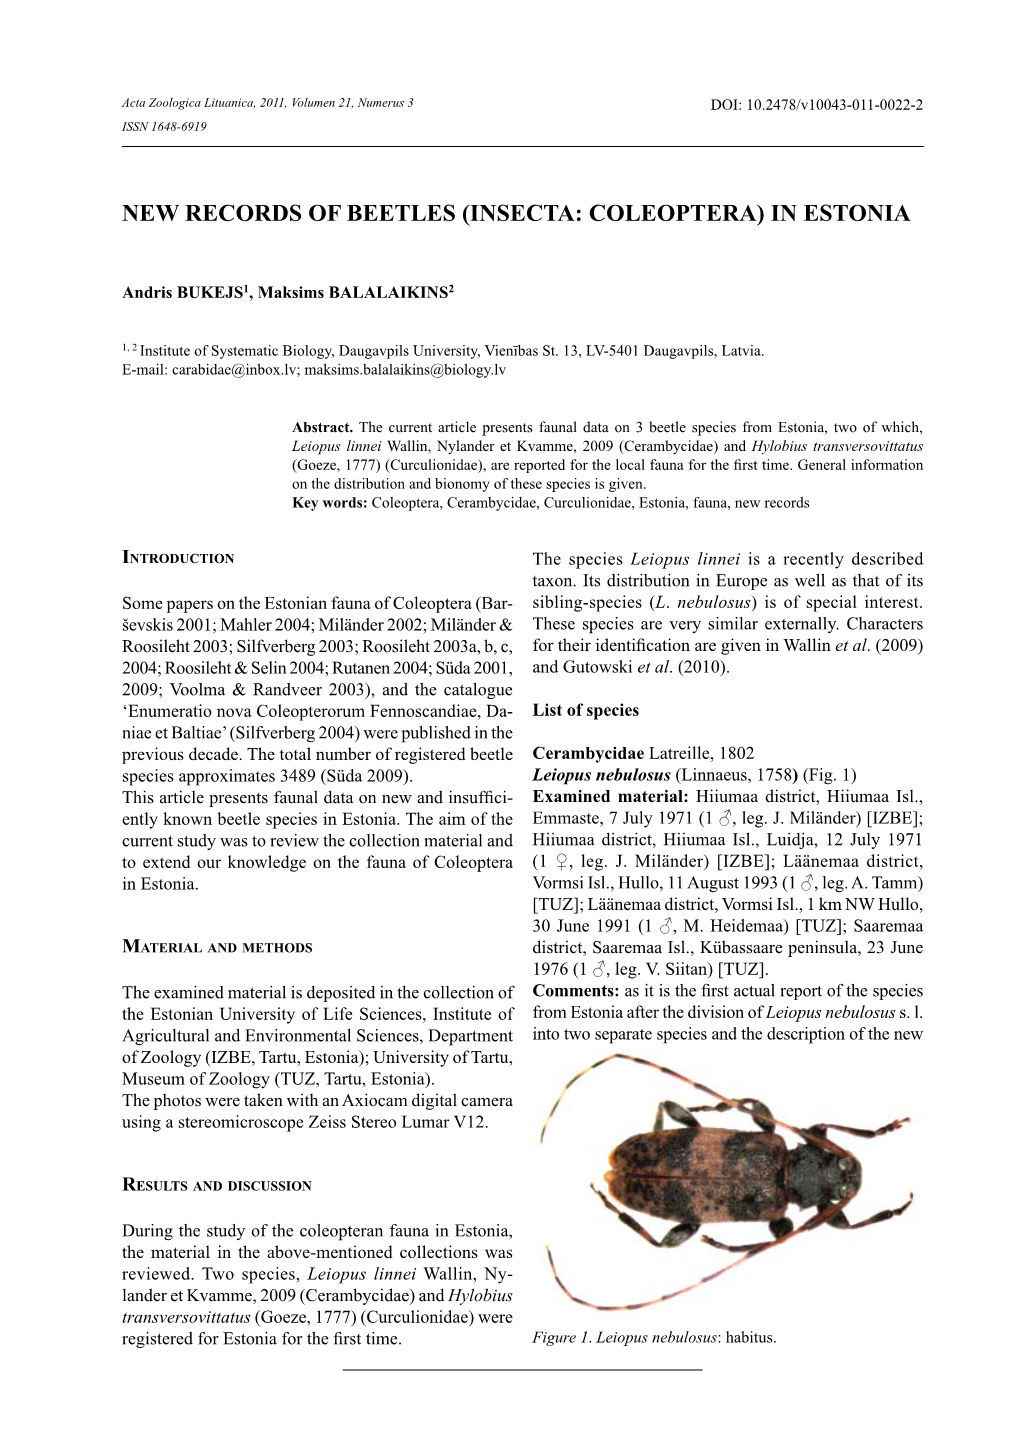 New Records of Beetles (Insecta: Coleoptera) in Estonia